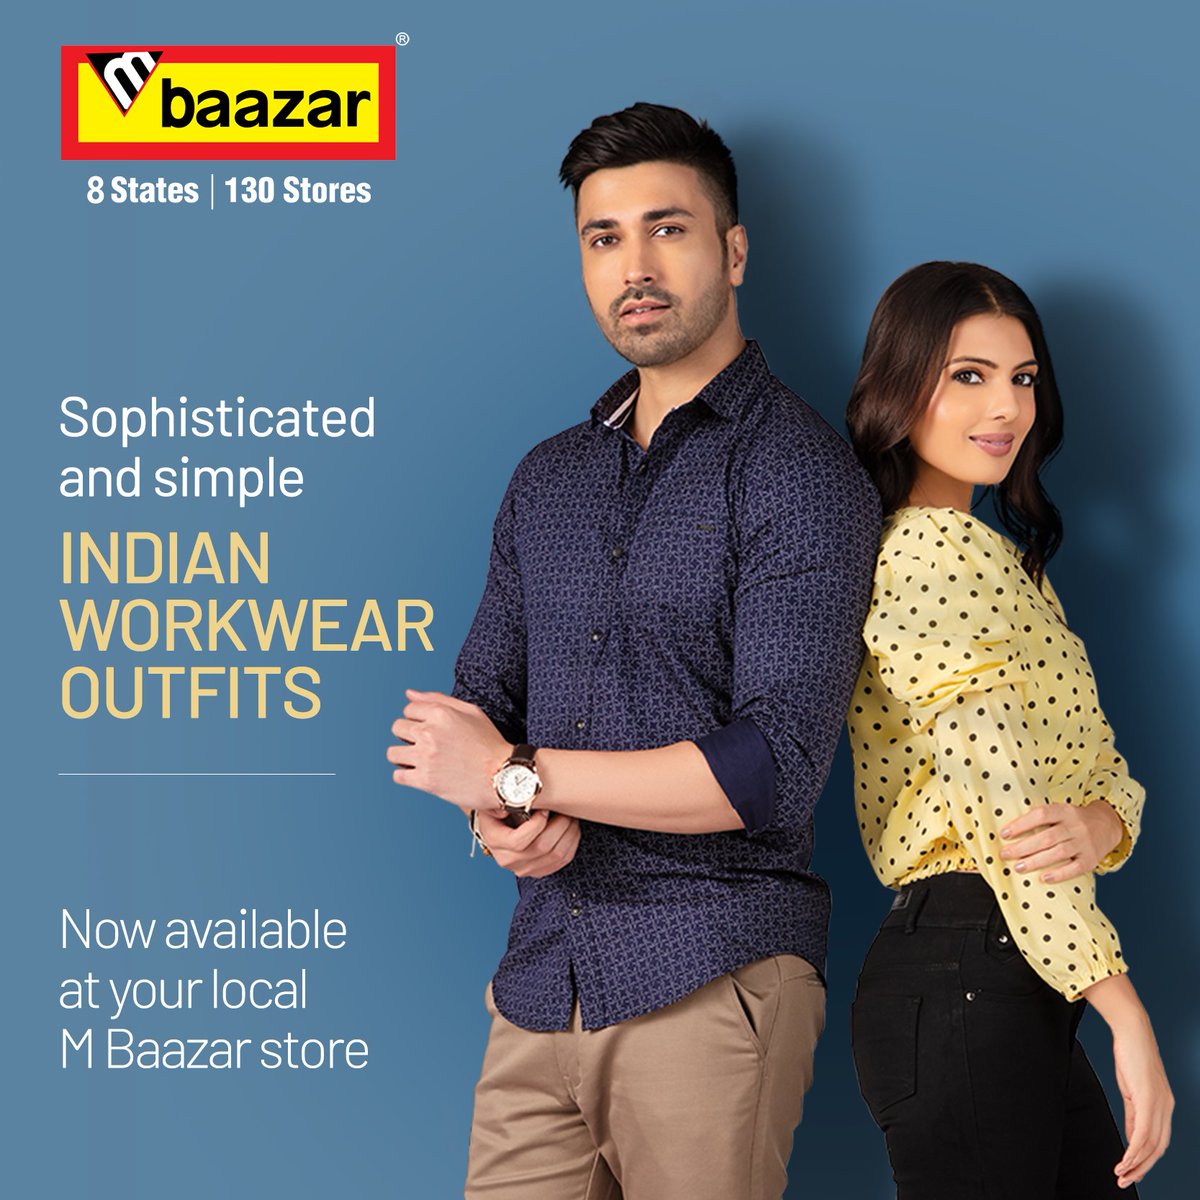 Elevate your workwear style with our range of elegant, trendy, and comfortable outfits today. Shop the new workwear collection from your nearest M Baazar store.

#mbaazar #thefashionstore #shoppingatmbaazar #comfortableclothing #workwearoutfits #summeroutfits  #indianoutfits